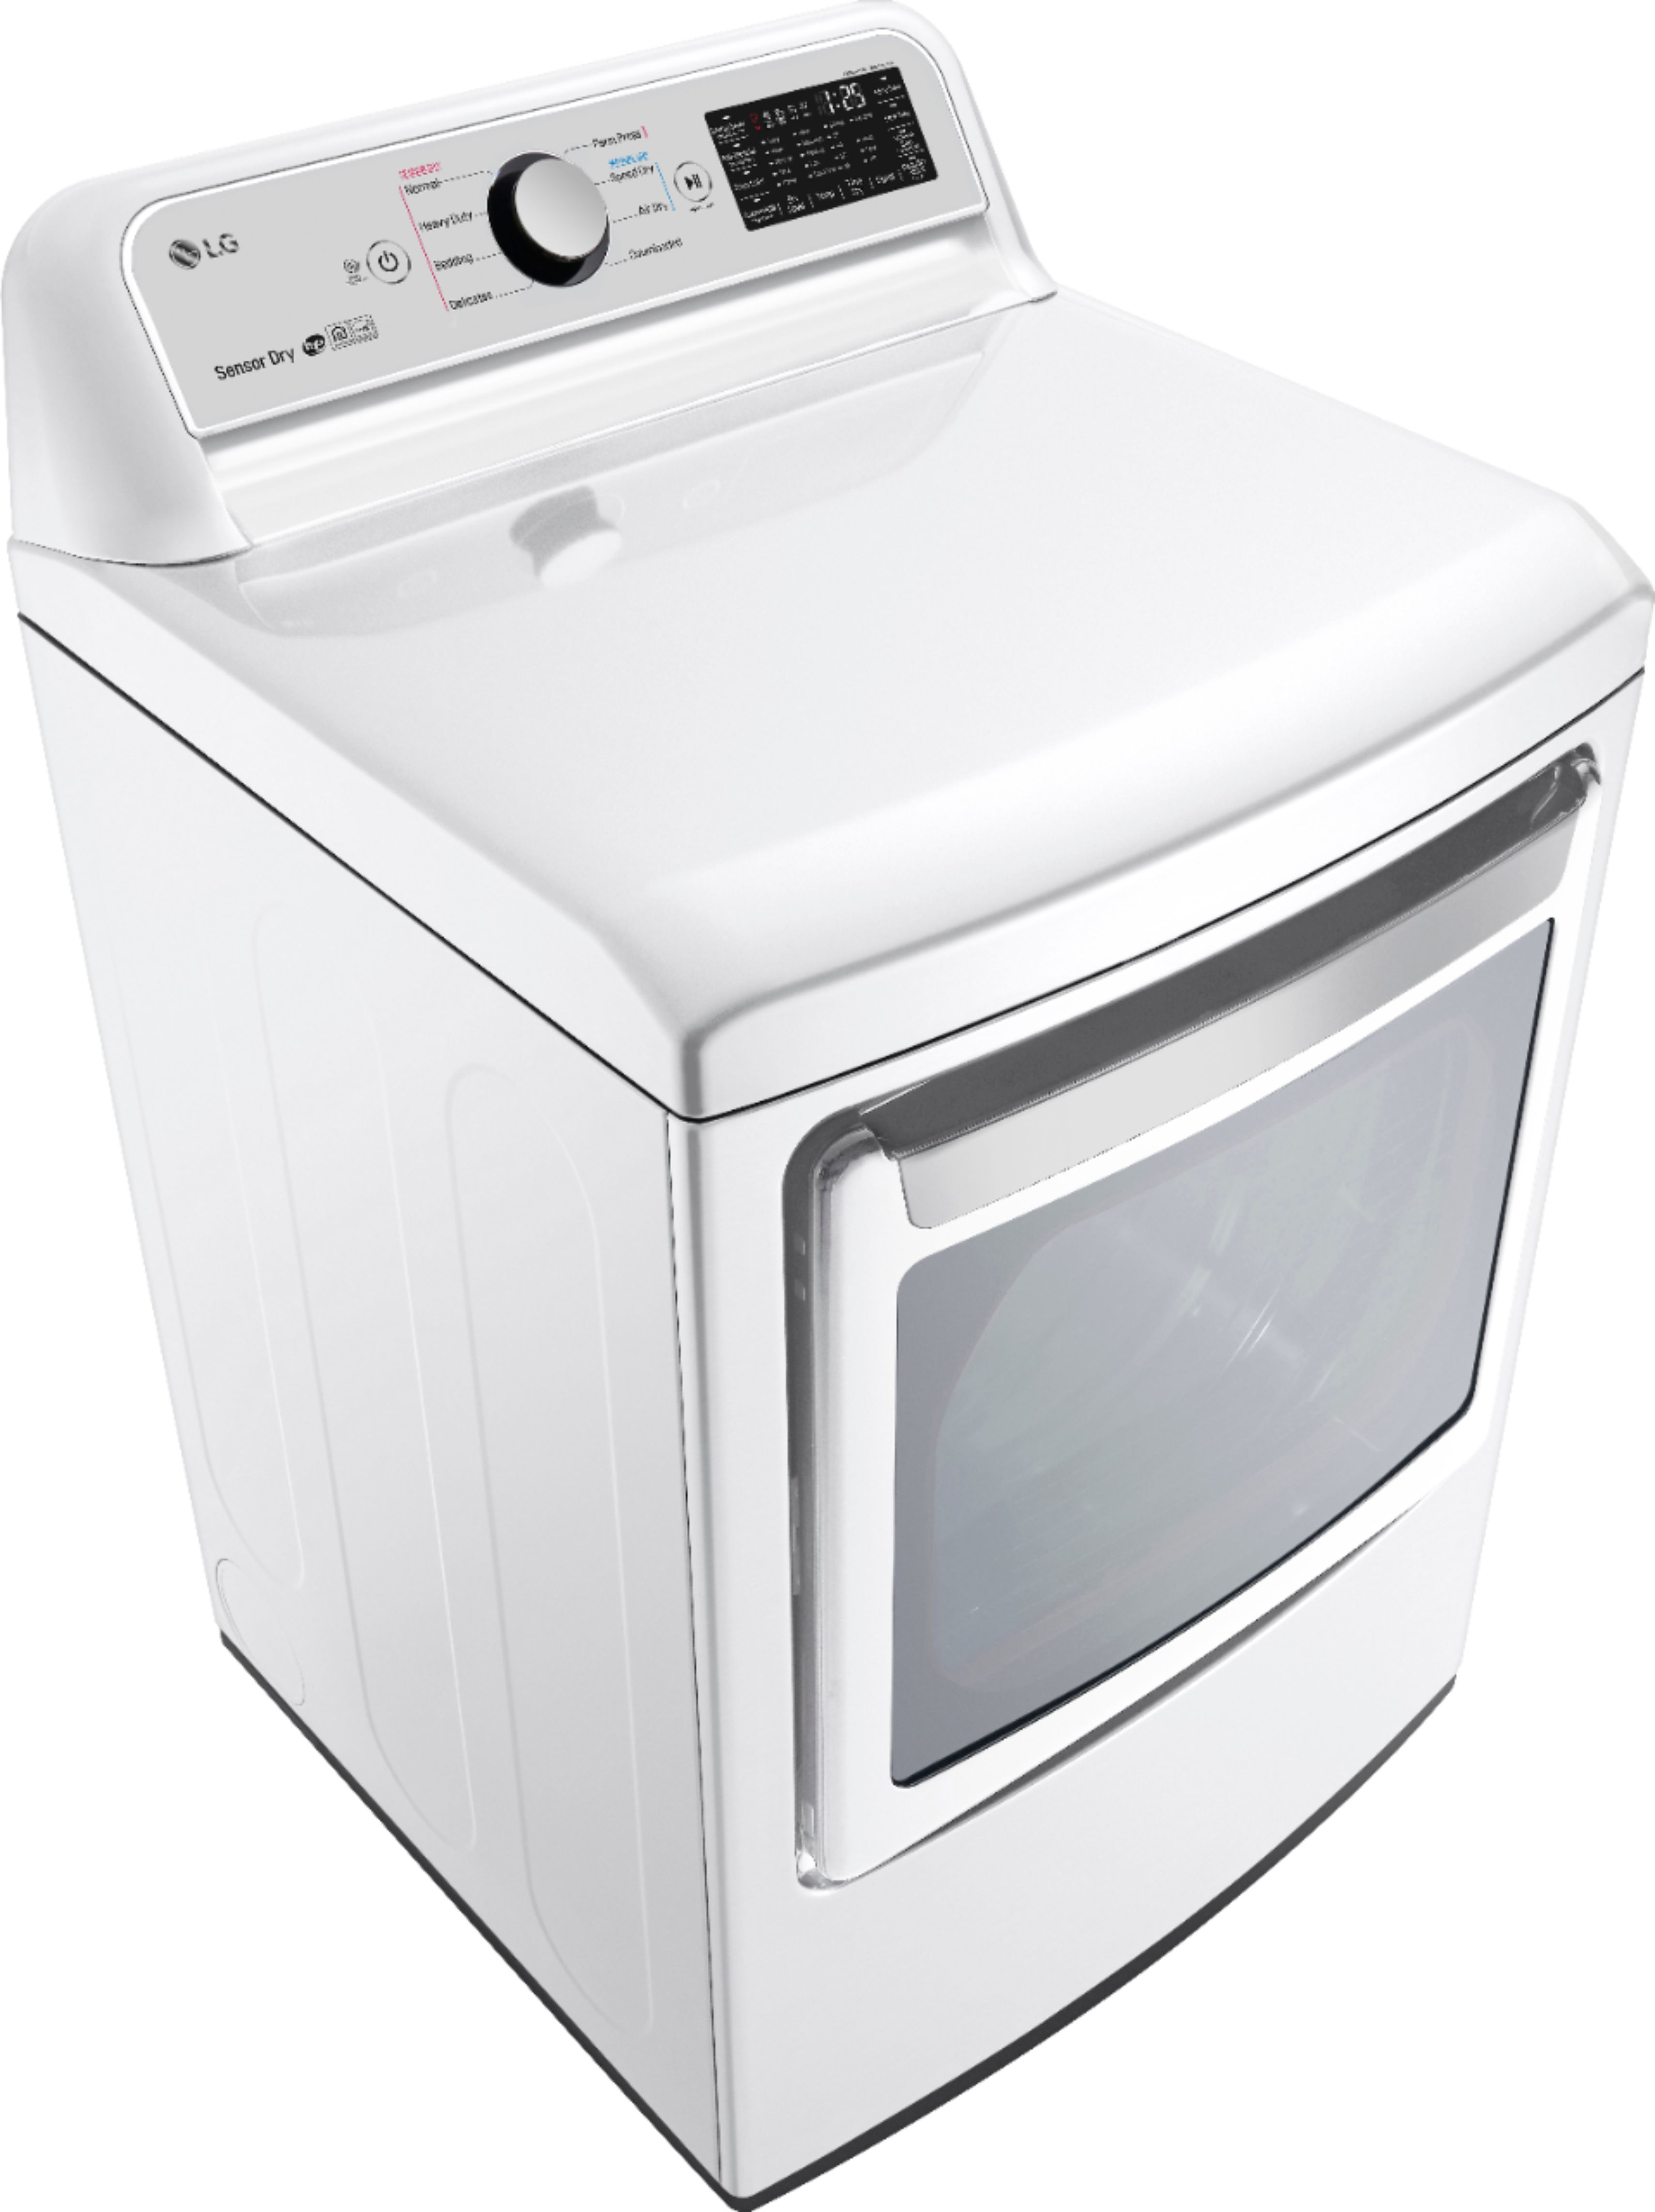 Angle View: LG - 7.3 Cu. Ft. Smart Gas Dryer with Sensor Dry - White